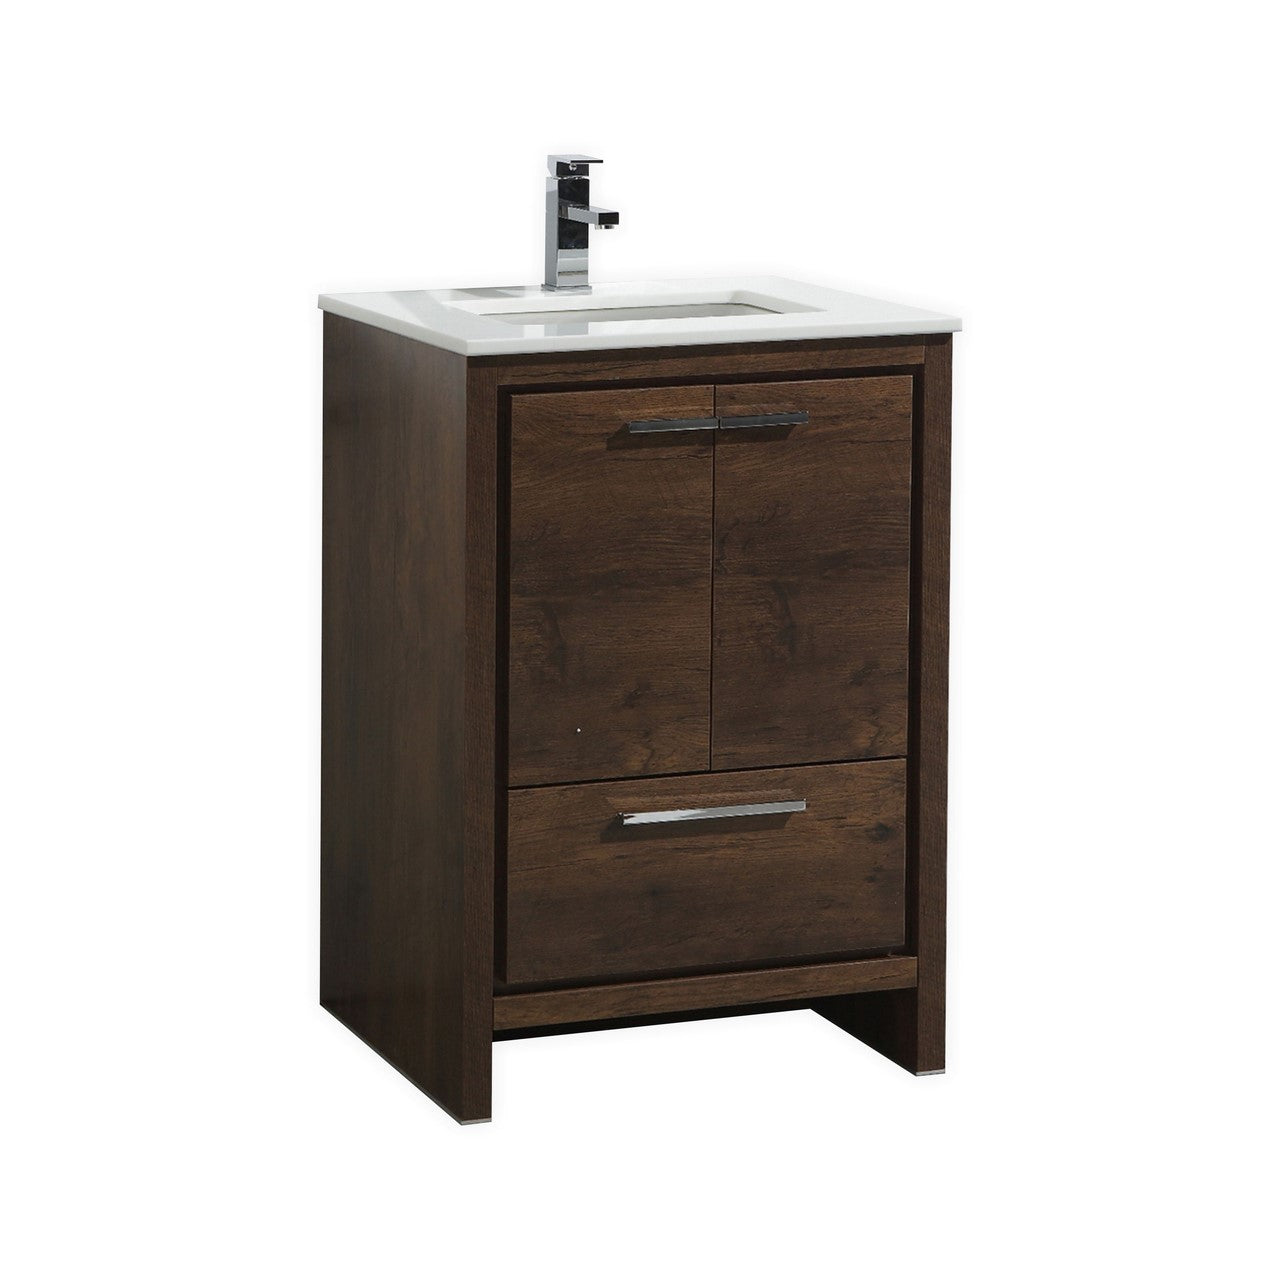 KUBEBATH Dolce AD624RW 24" Single Bathroom Vanity in Rosewood with White Quartz, Rectangle Sink, Angled View